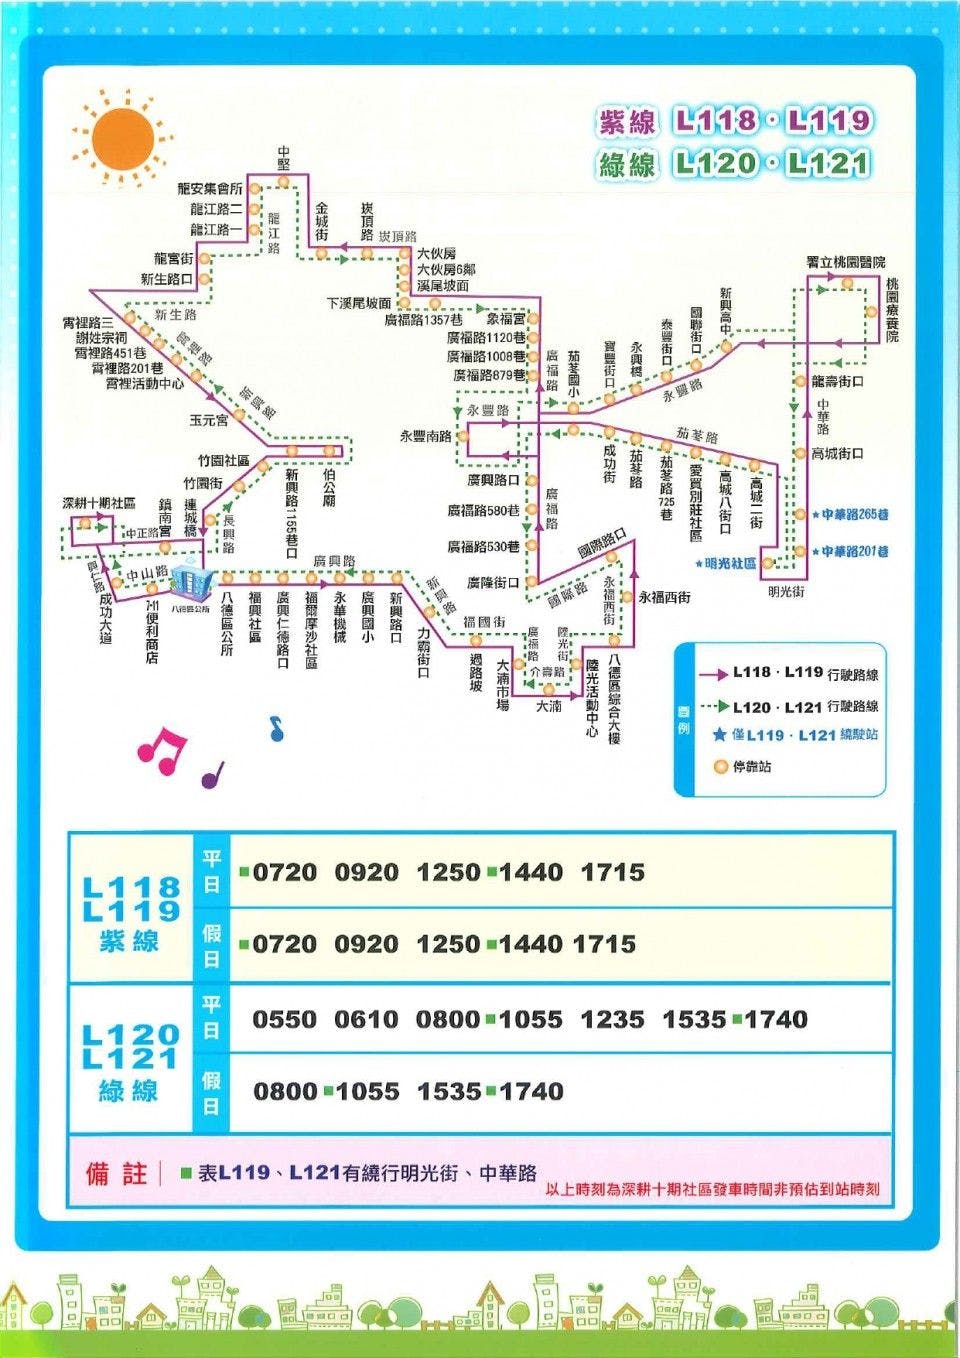 L119Route Map-桃園 Bus